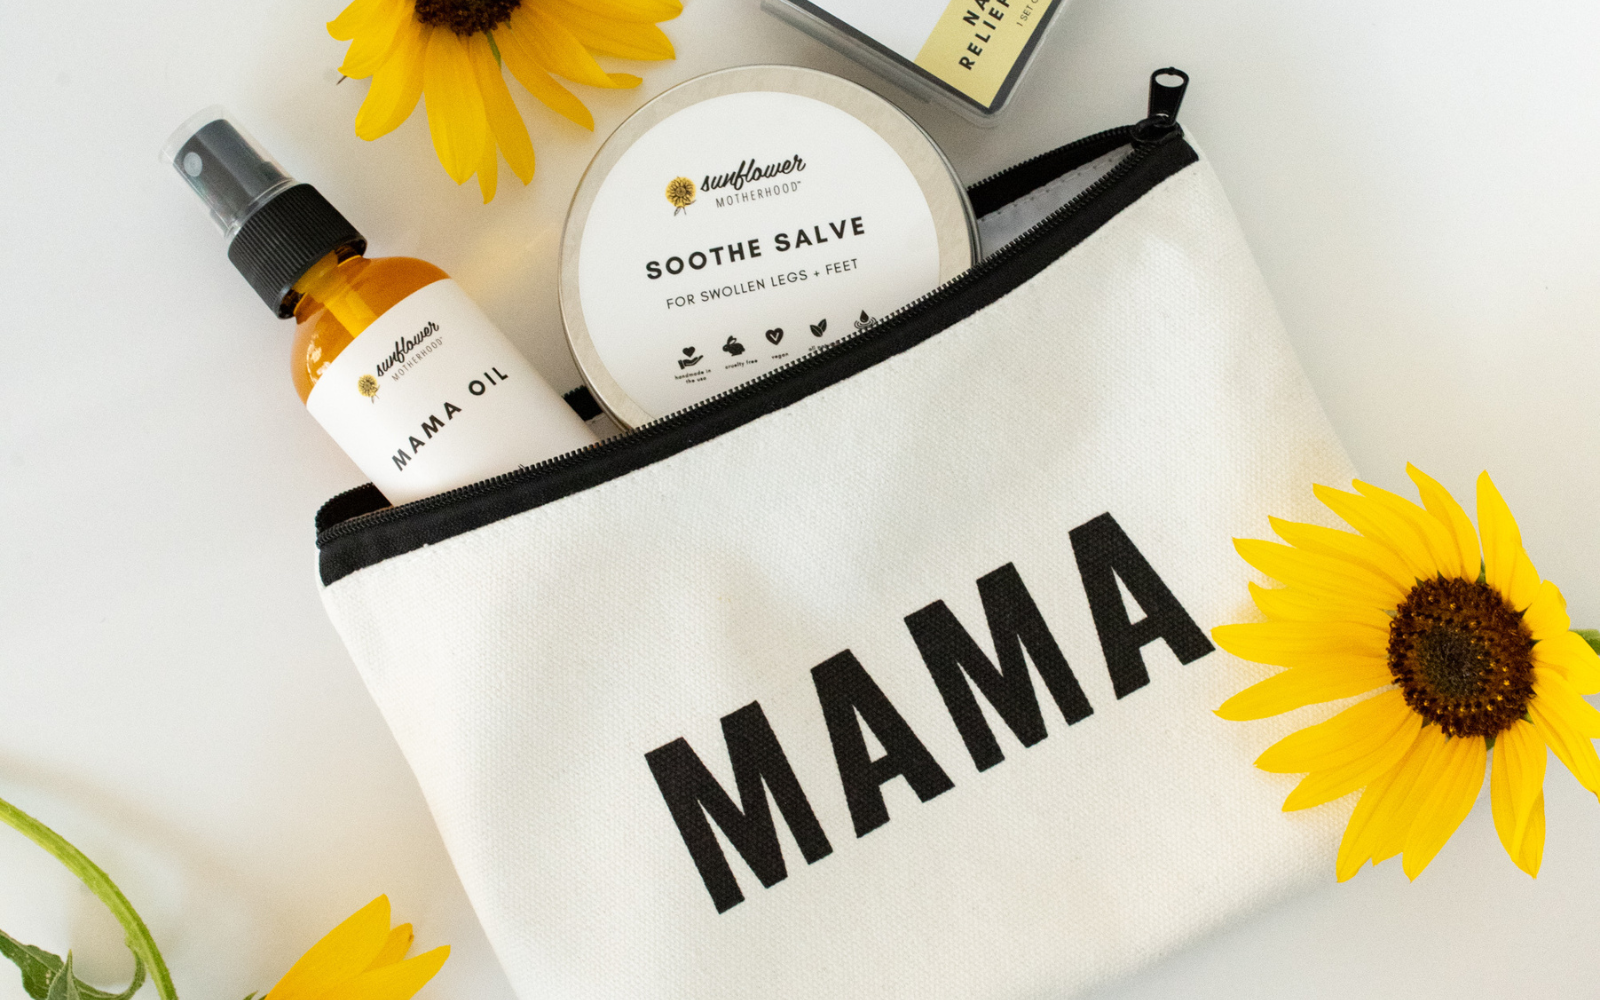 A white bag with sunflowers and a bottle of mama, representing a cheerful and nurturing vibe.